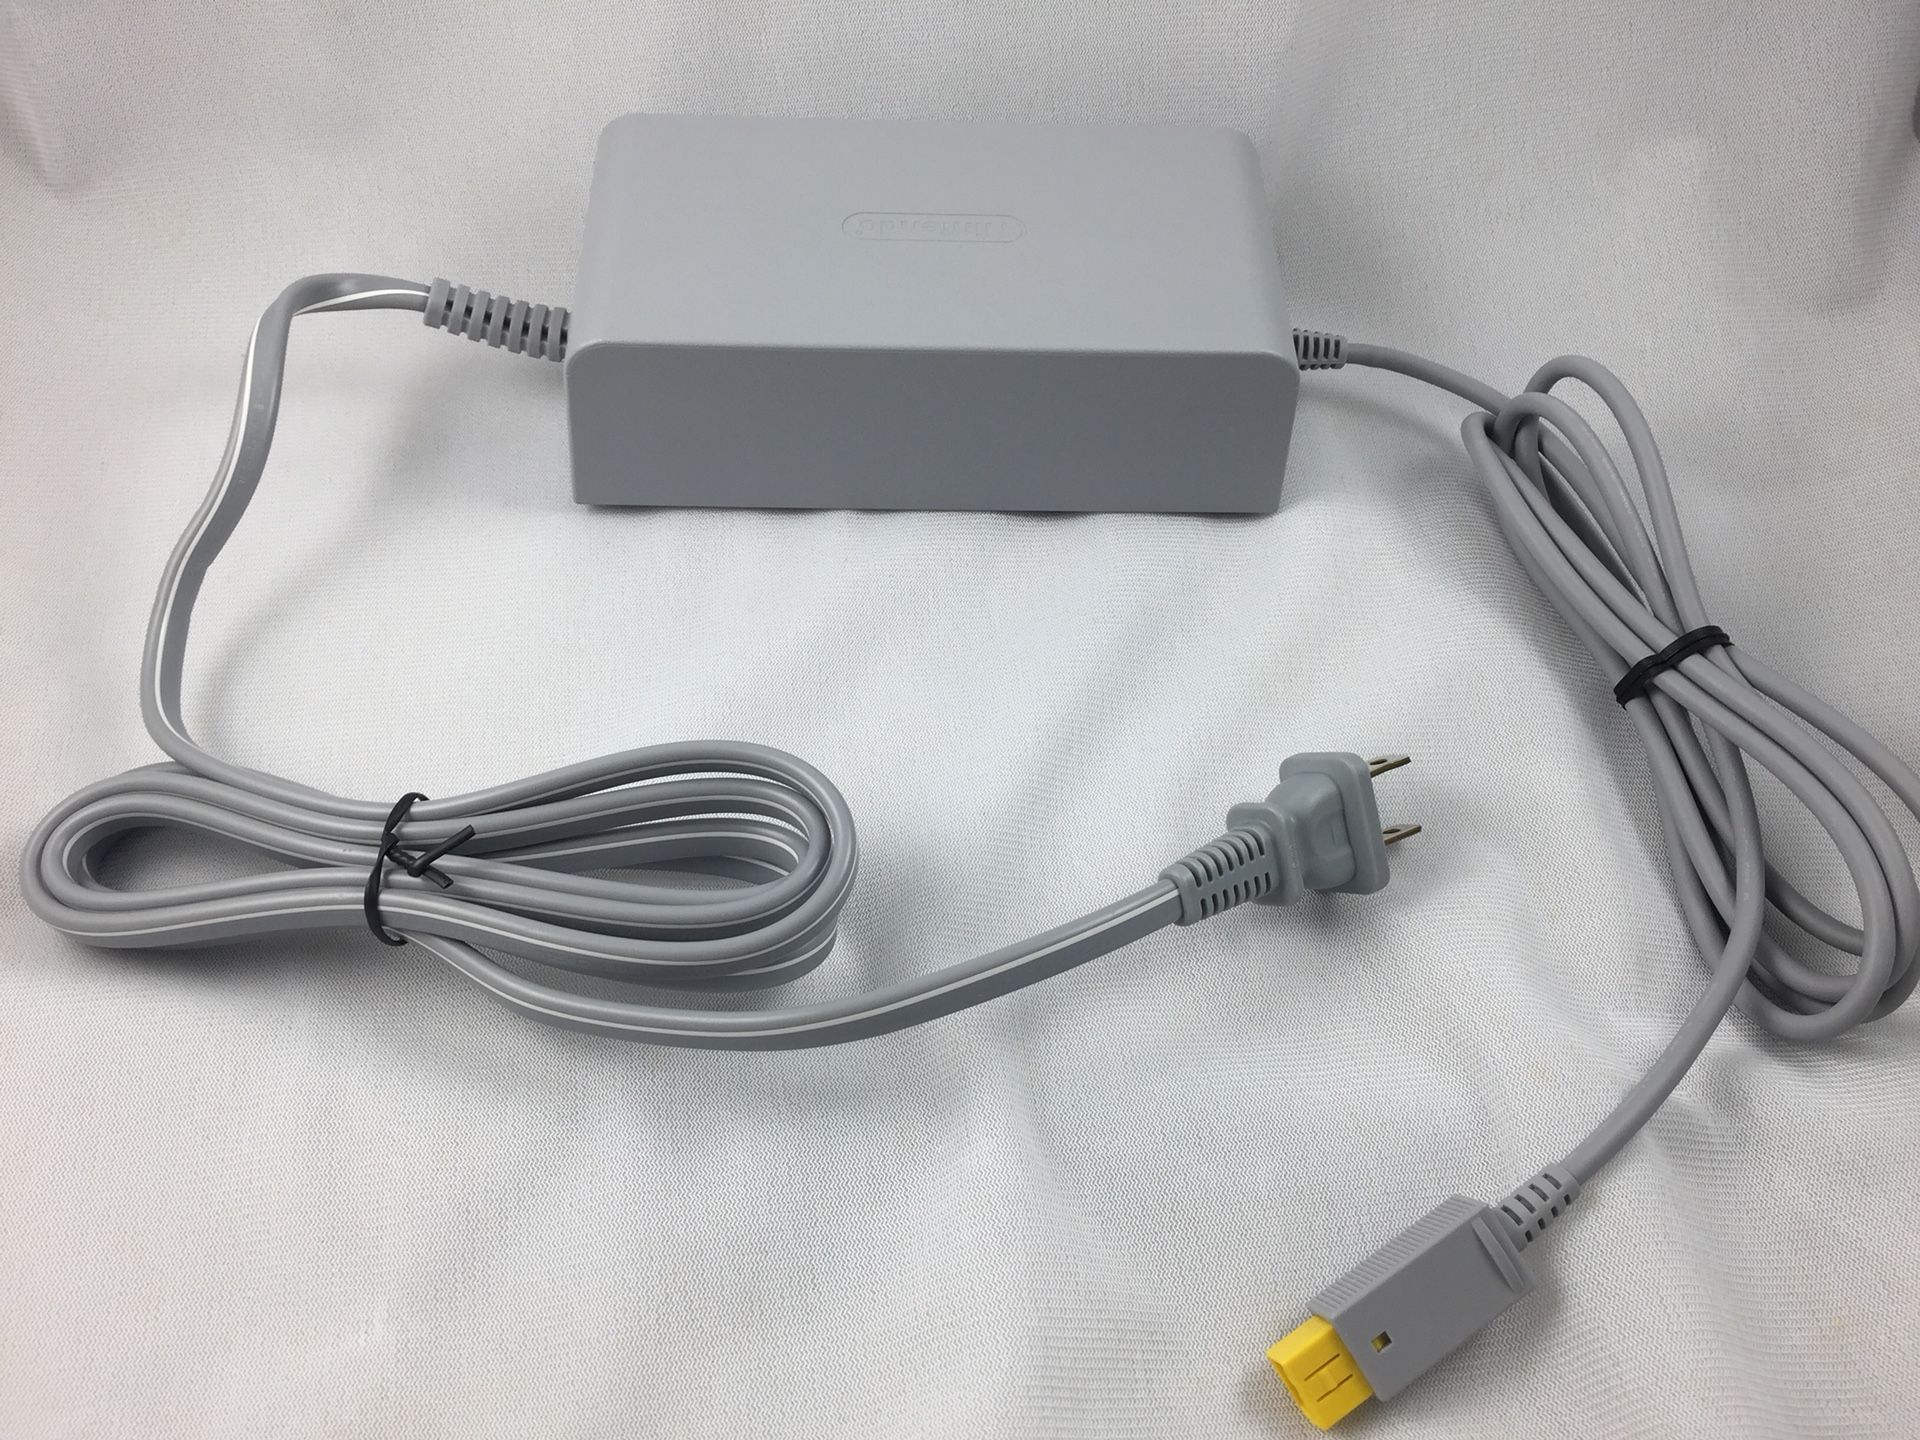 New power cord ac adapter for Wii U